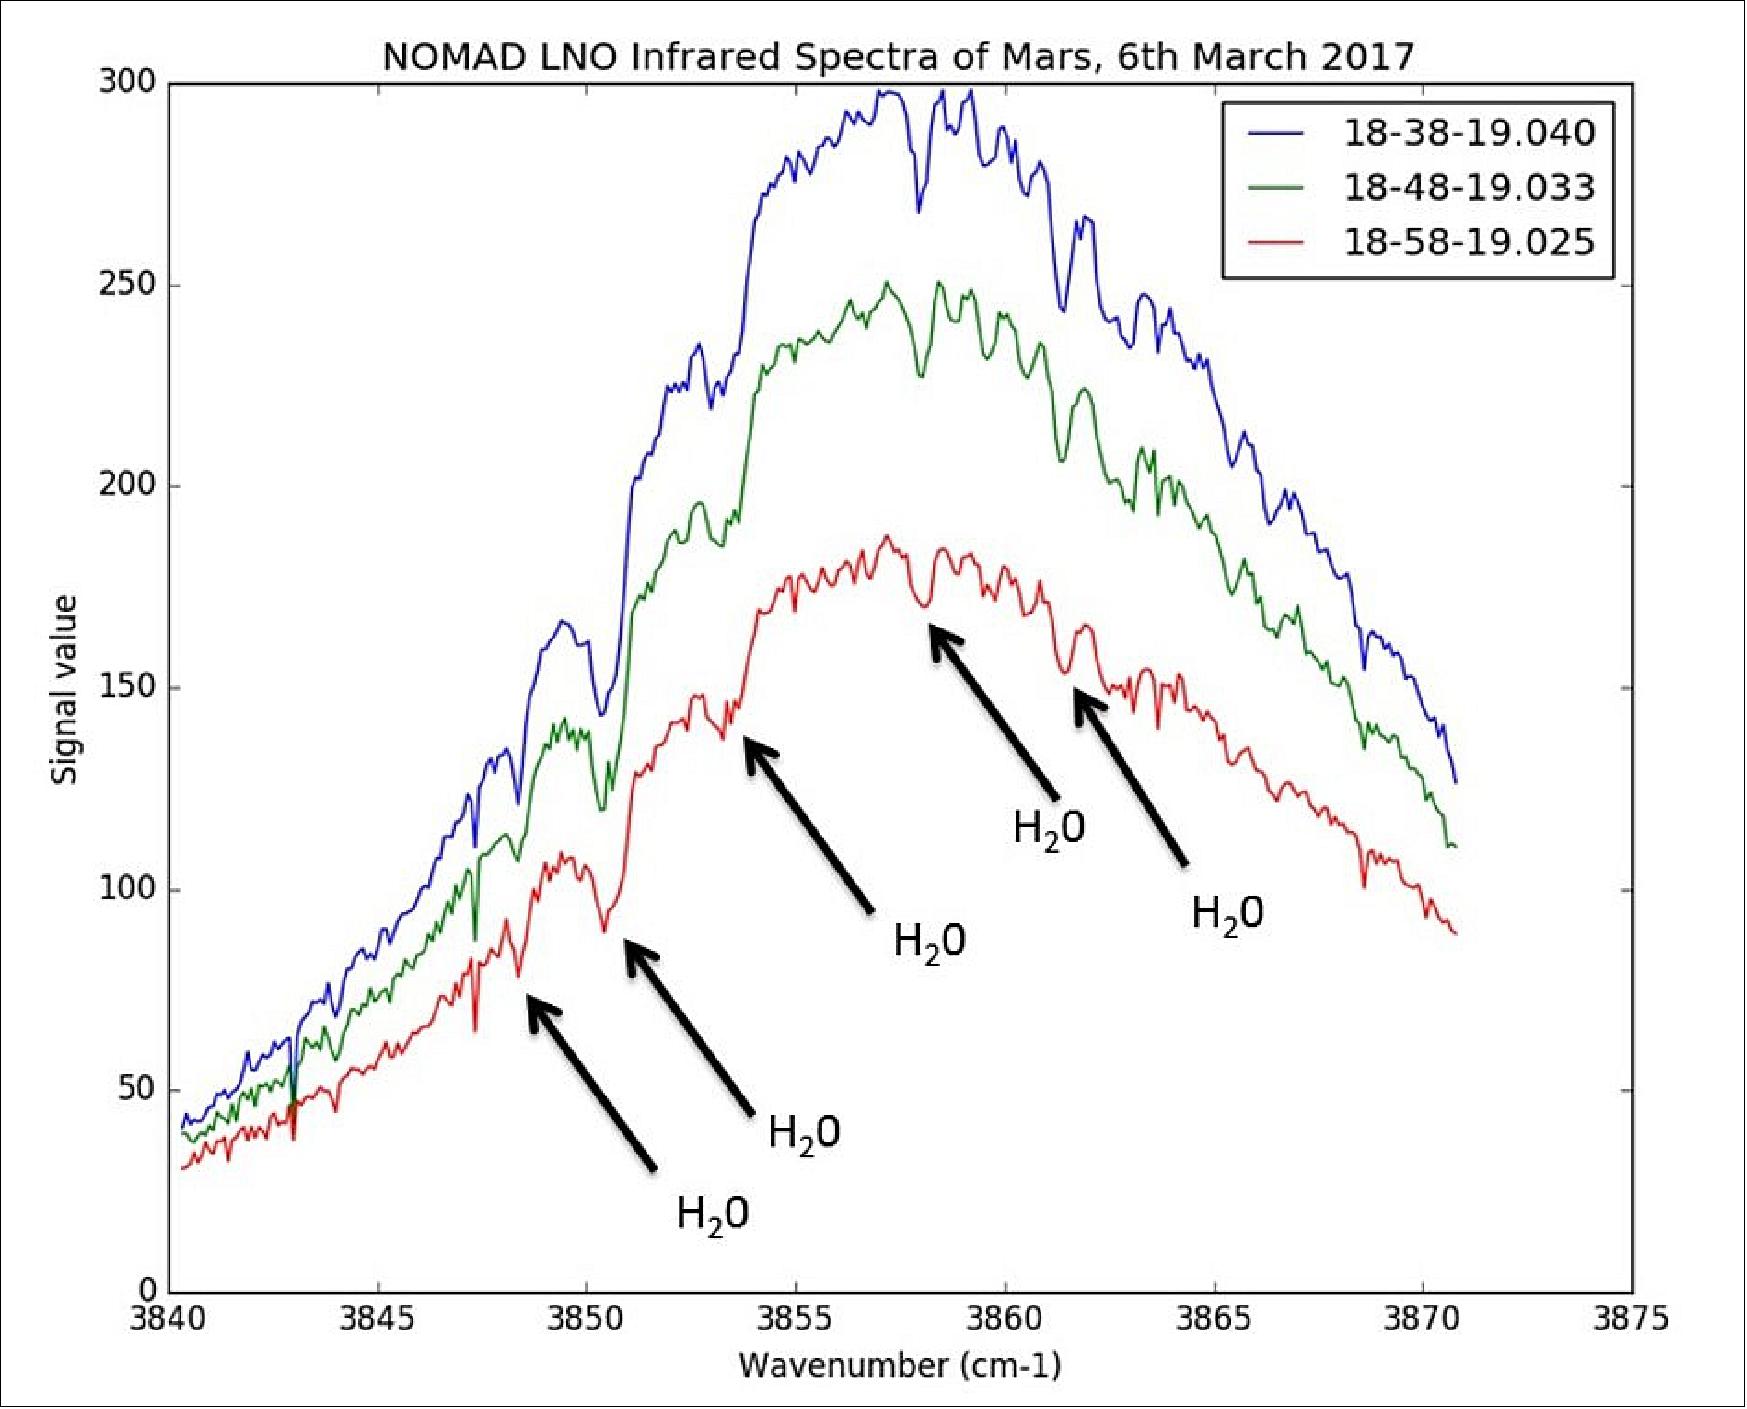 Figure 109: Test measurements of the martian atmosphere by the ExoMars TGO (Trace Gas Orbiter) NOMAD spectrometer, made on 6 March 2017. The spectra were acquired with the infrared channel of the instrument, by looking at the sunlight reflected from the planet’s surface. It shows the presence of water vapor. The three colors represent three spectra taken at different times, as indicated in the legend (image credit: ESA/Roscosmos/ExoMars/NOMAD/BISA/IAA/INAF/OU)